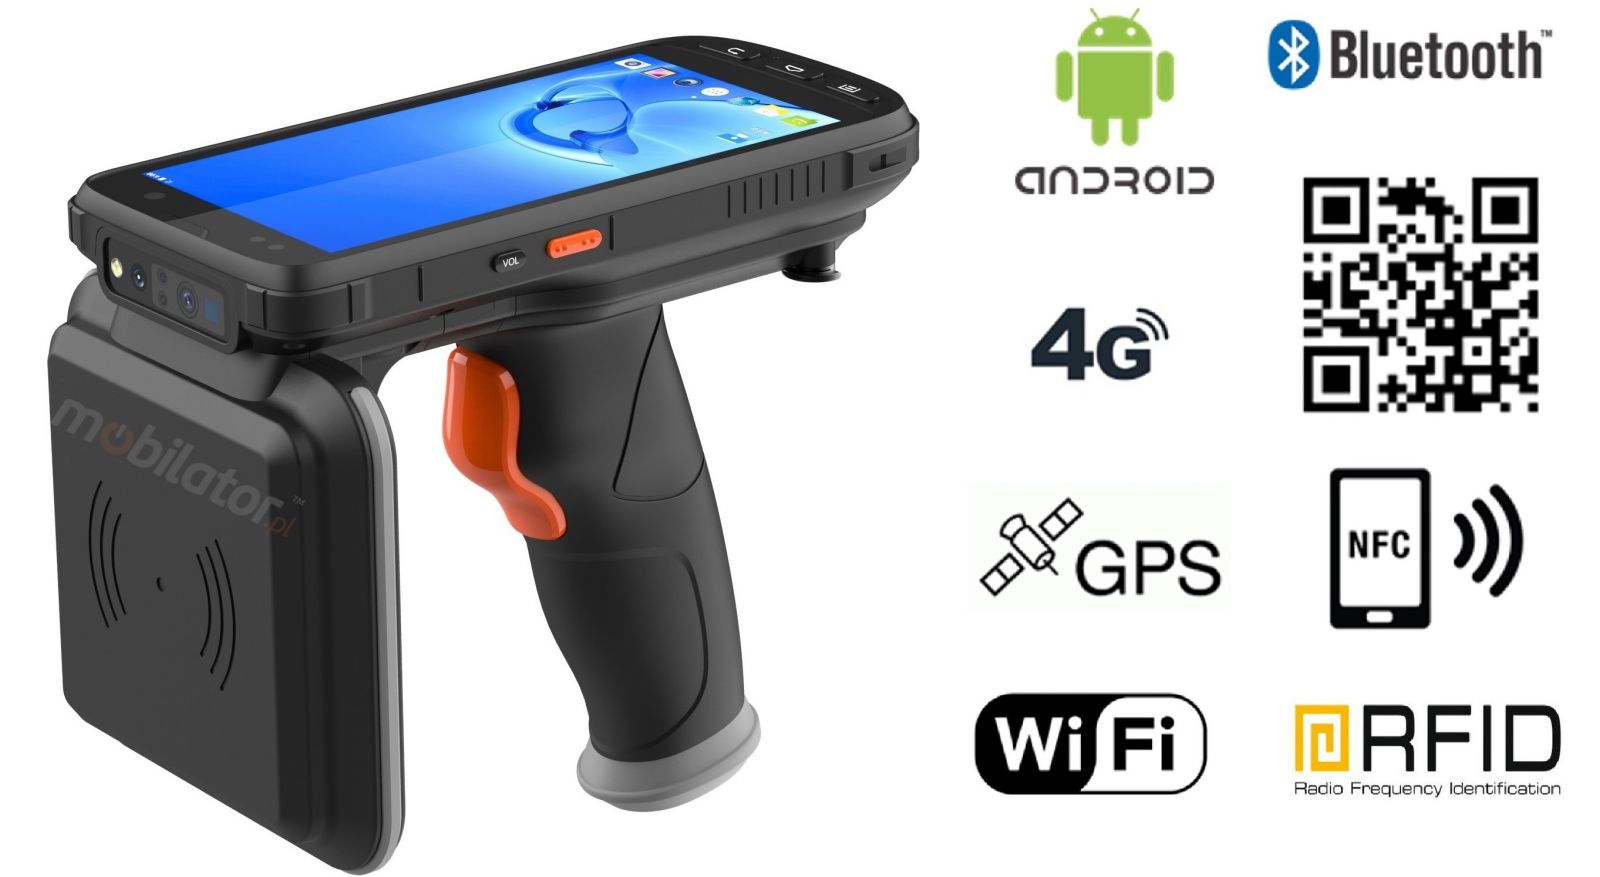 MobiPad XX-B6 v.18 - Industrial data collector (IP65) with a 2D code scanner (Zebra SE4710) and NFC + 4G LTE + Bluetooth + WiFi + UHF 18m with extended memory (4GB + 64GB) + Pistol Grip 